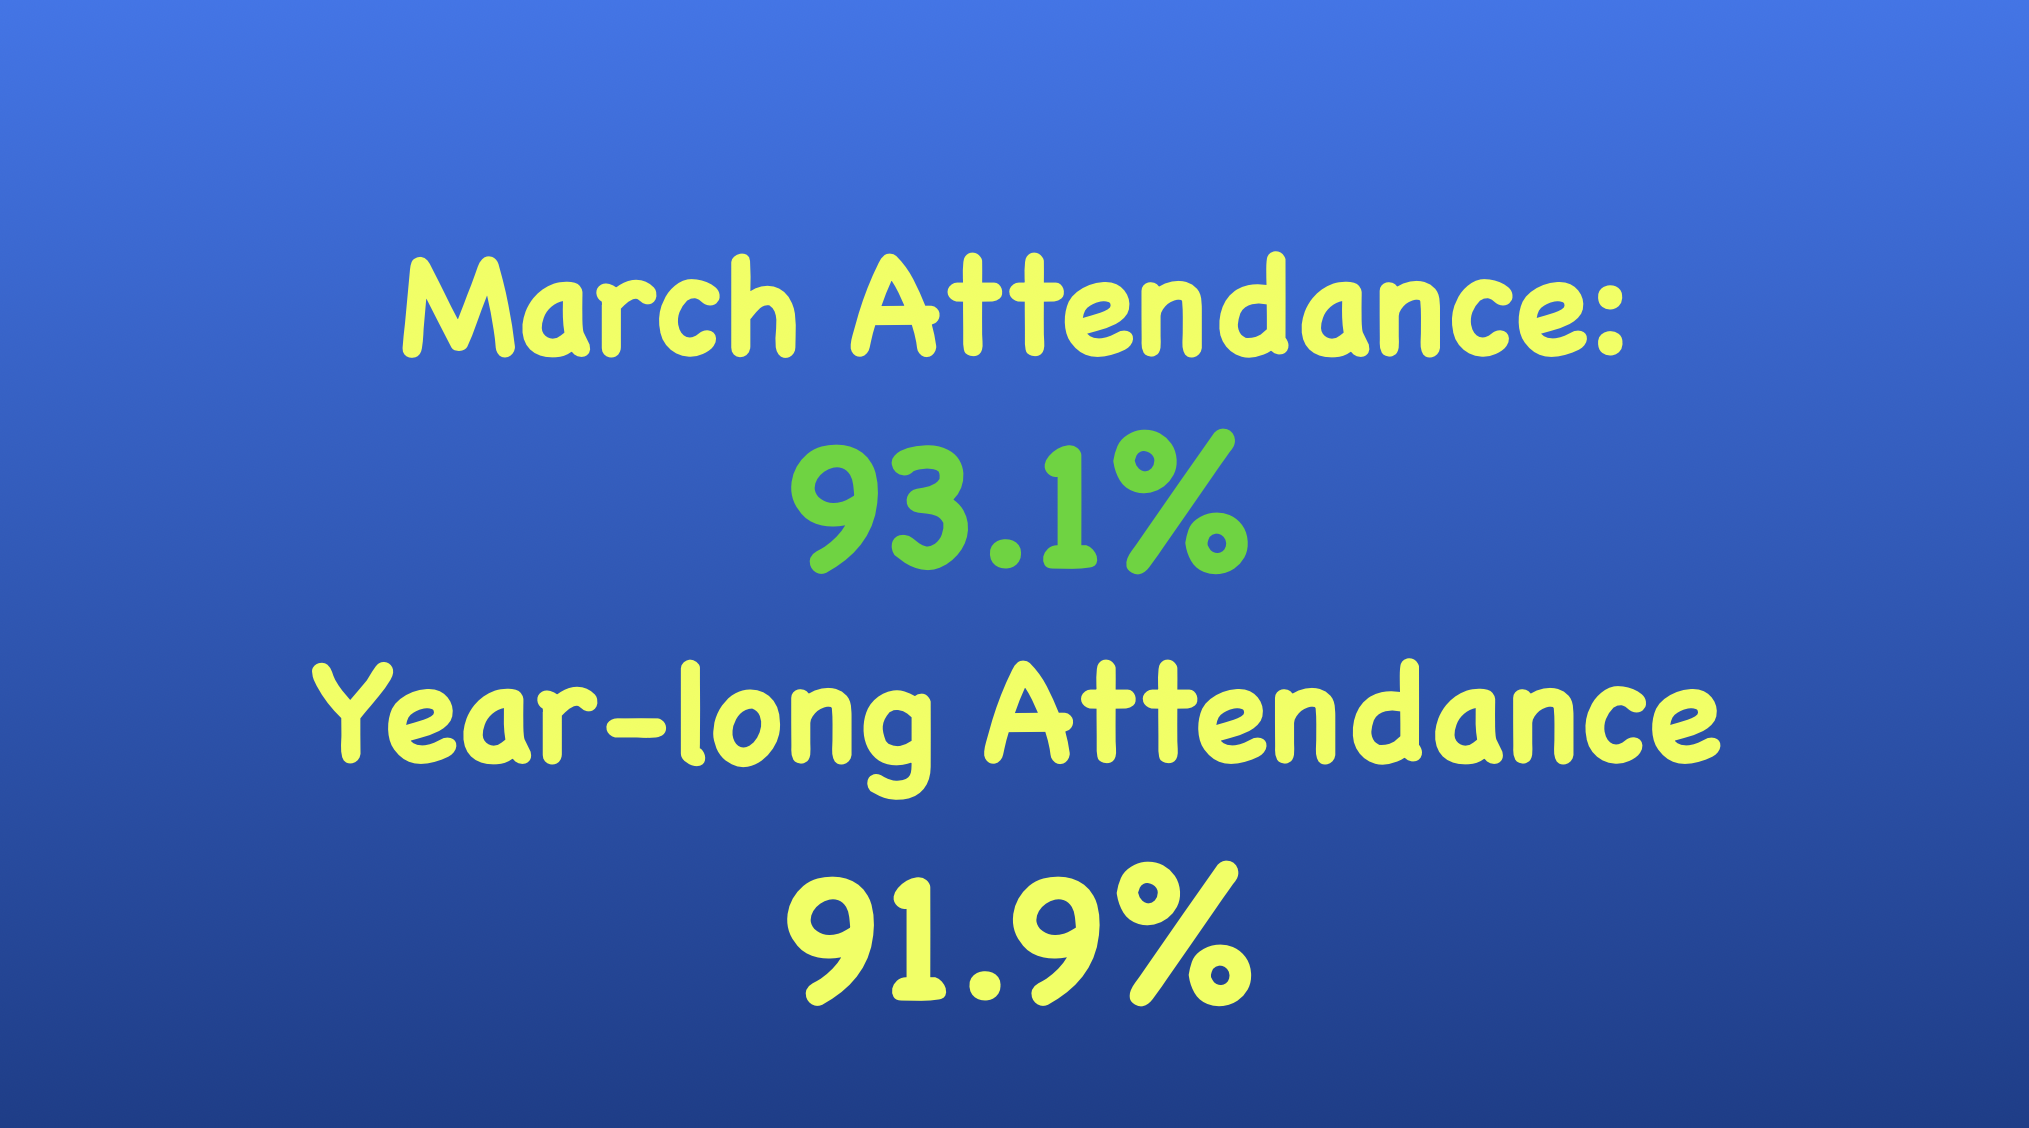 March's average daily attendance was 93.1%